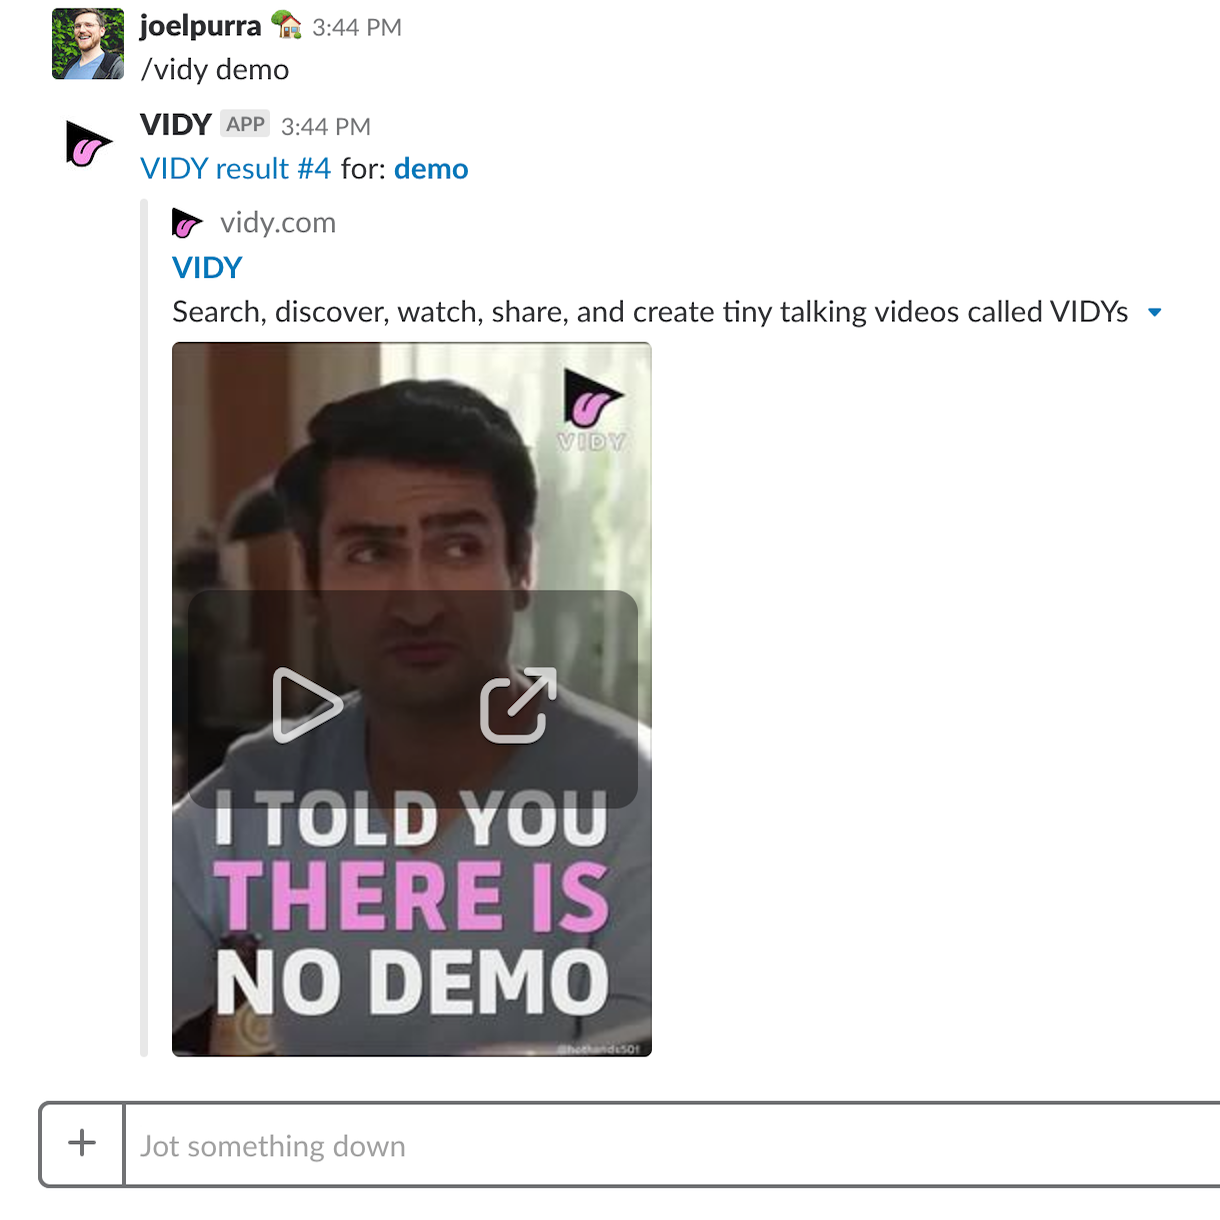 Screenshot of the /vidy command used in Slack